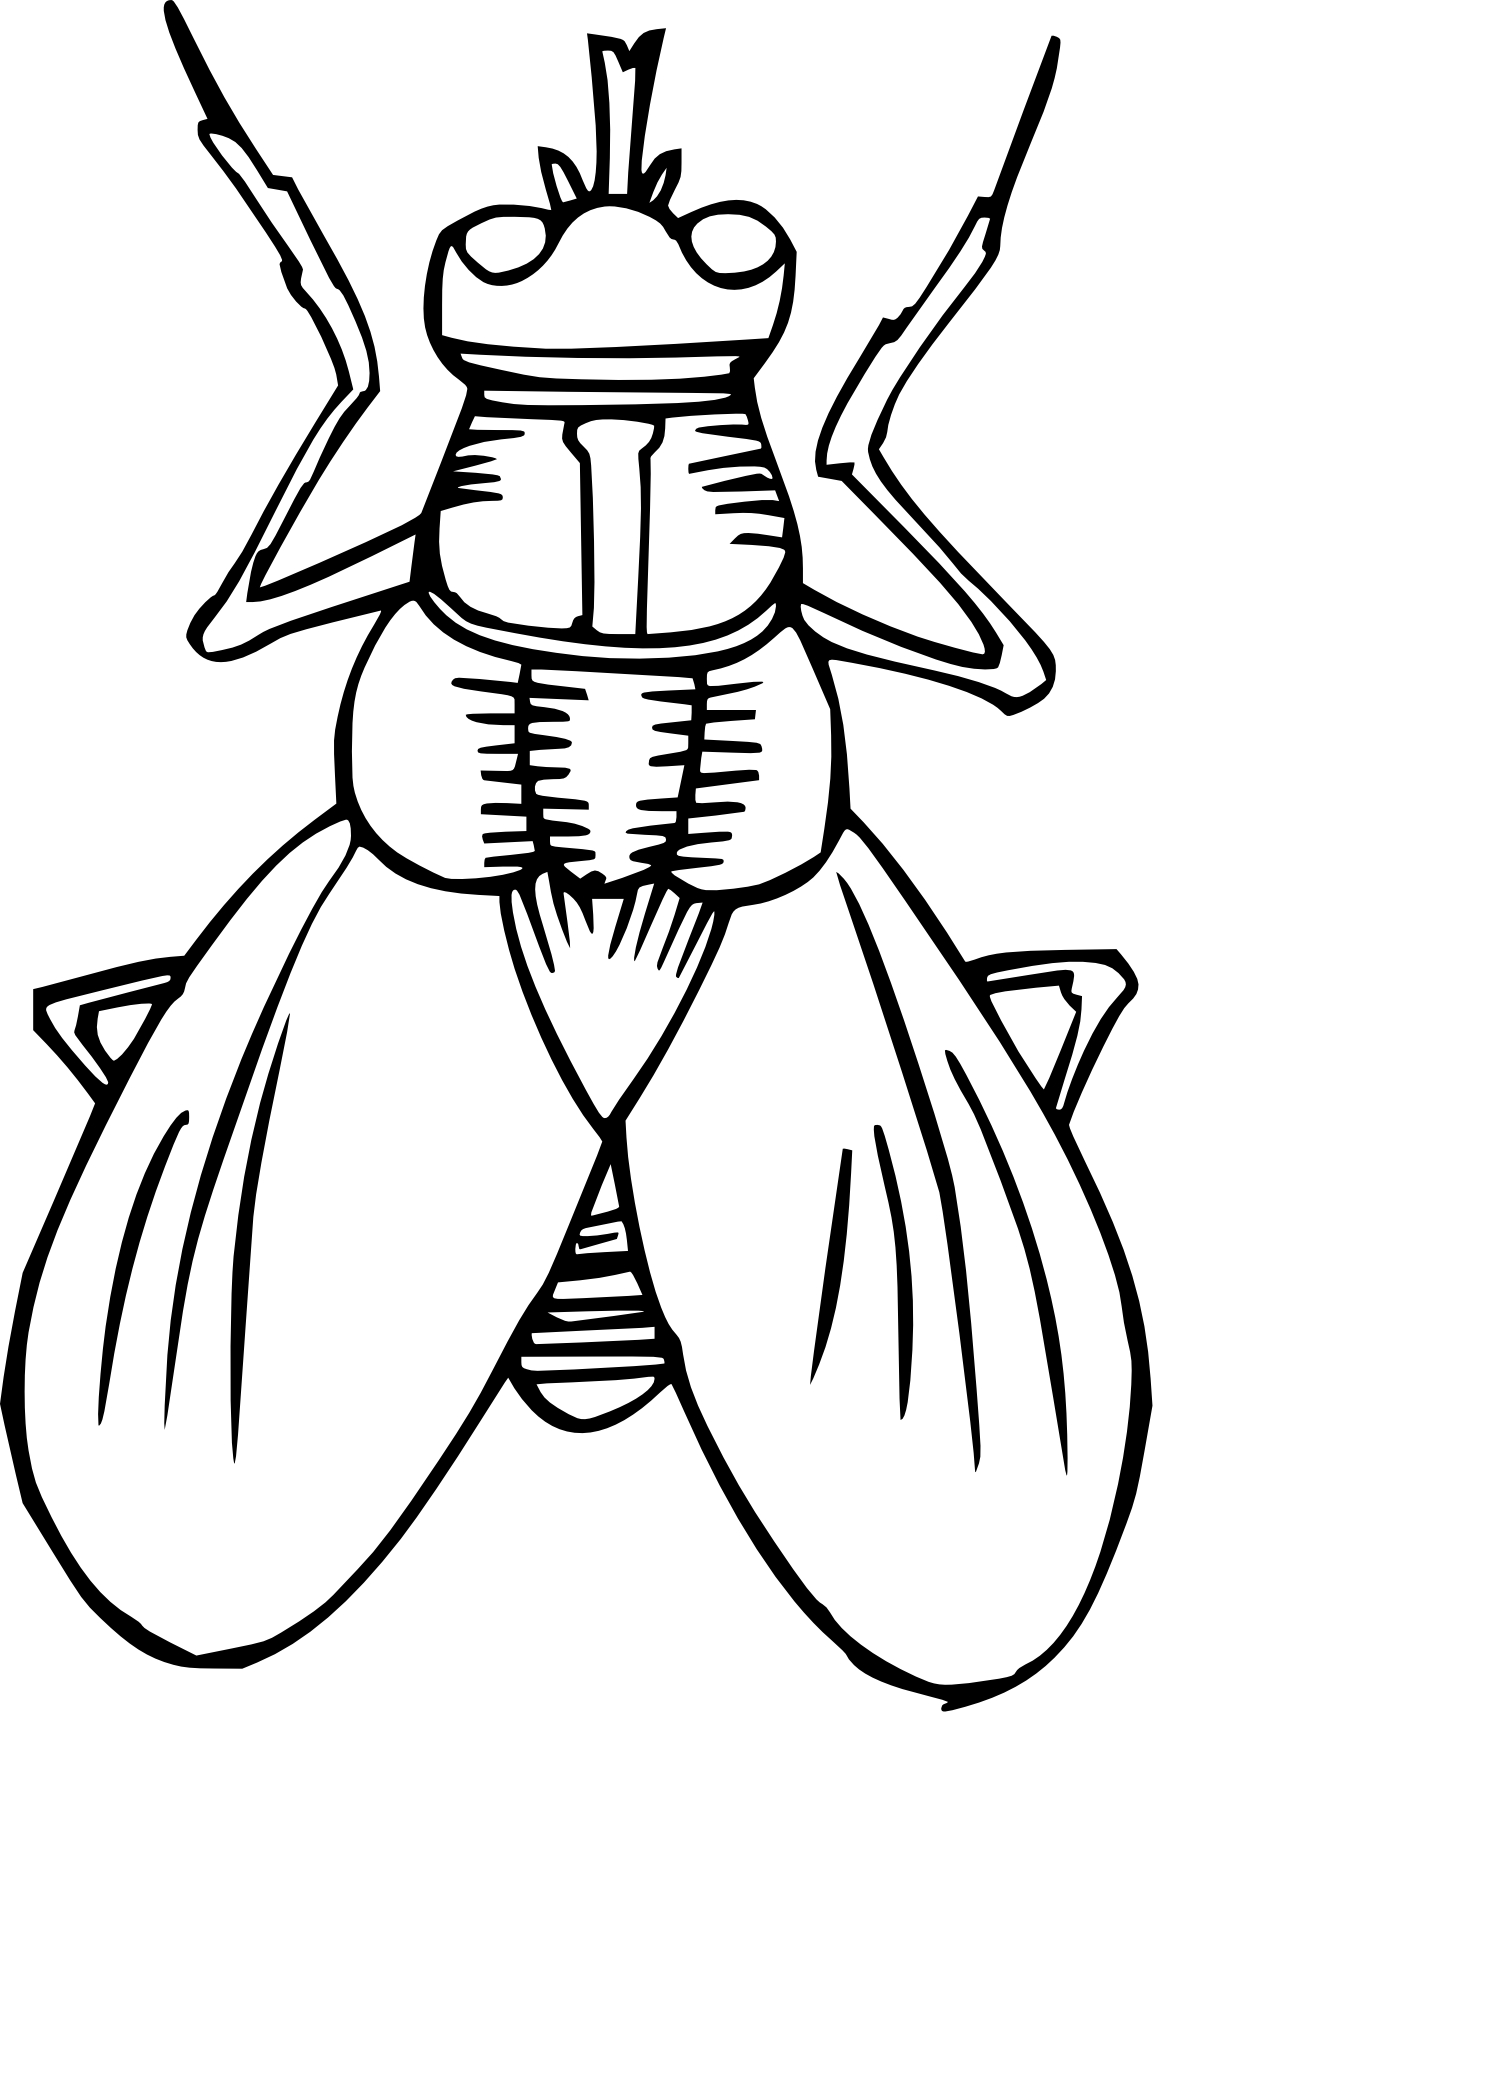 Fly drawing and coloring page